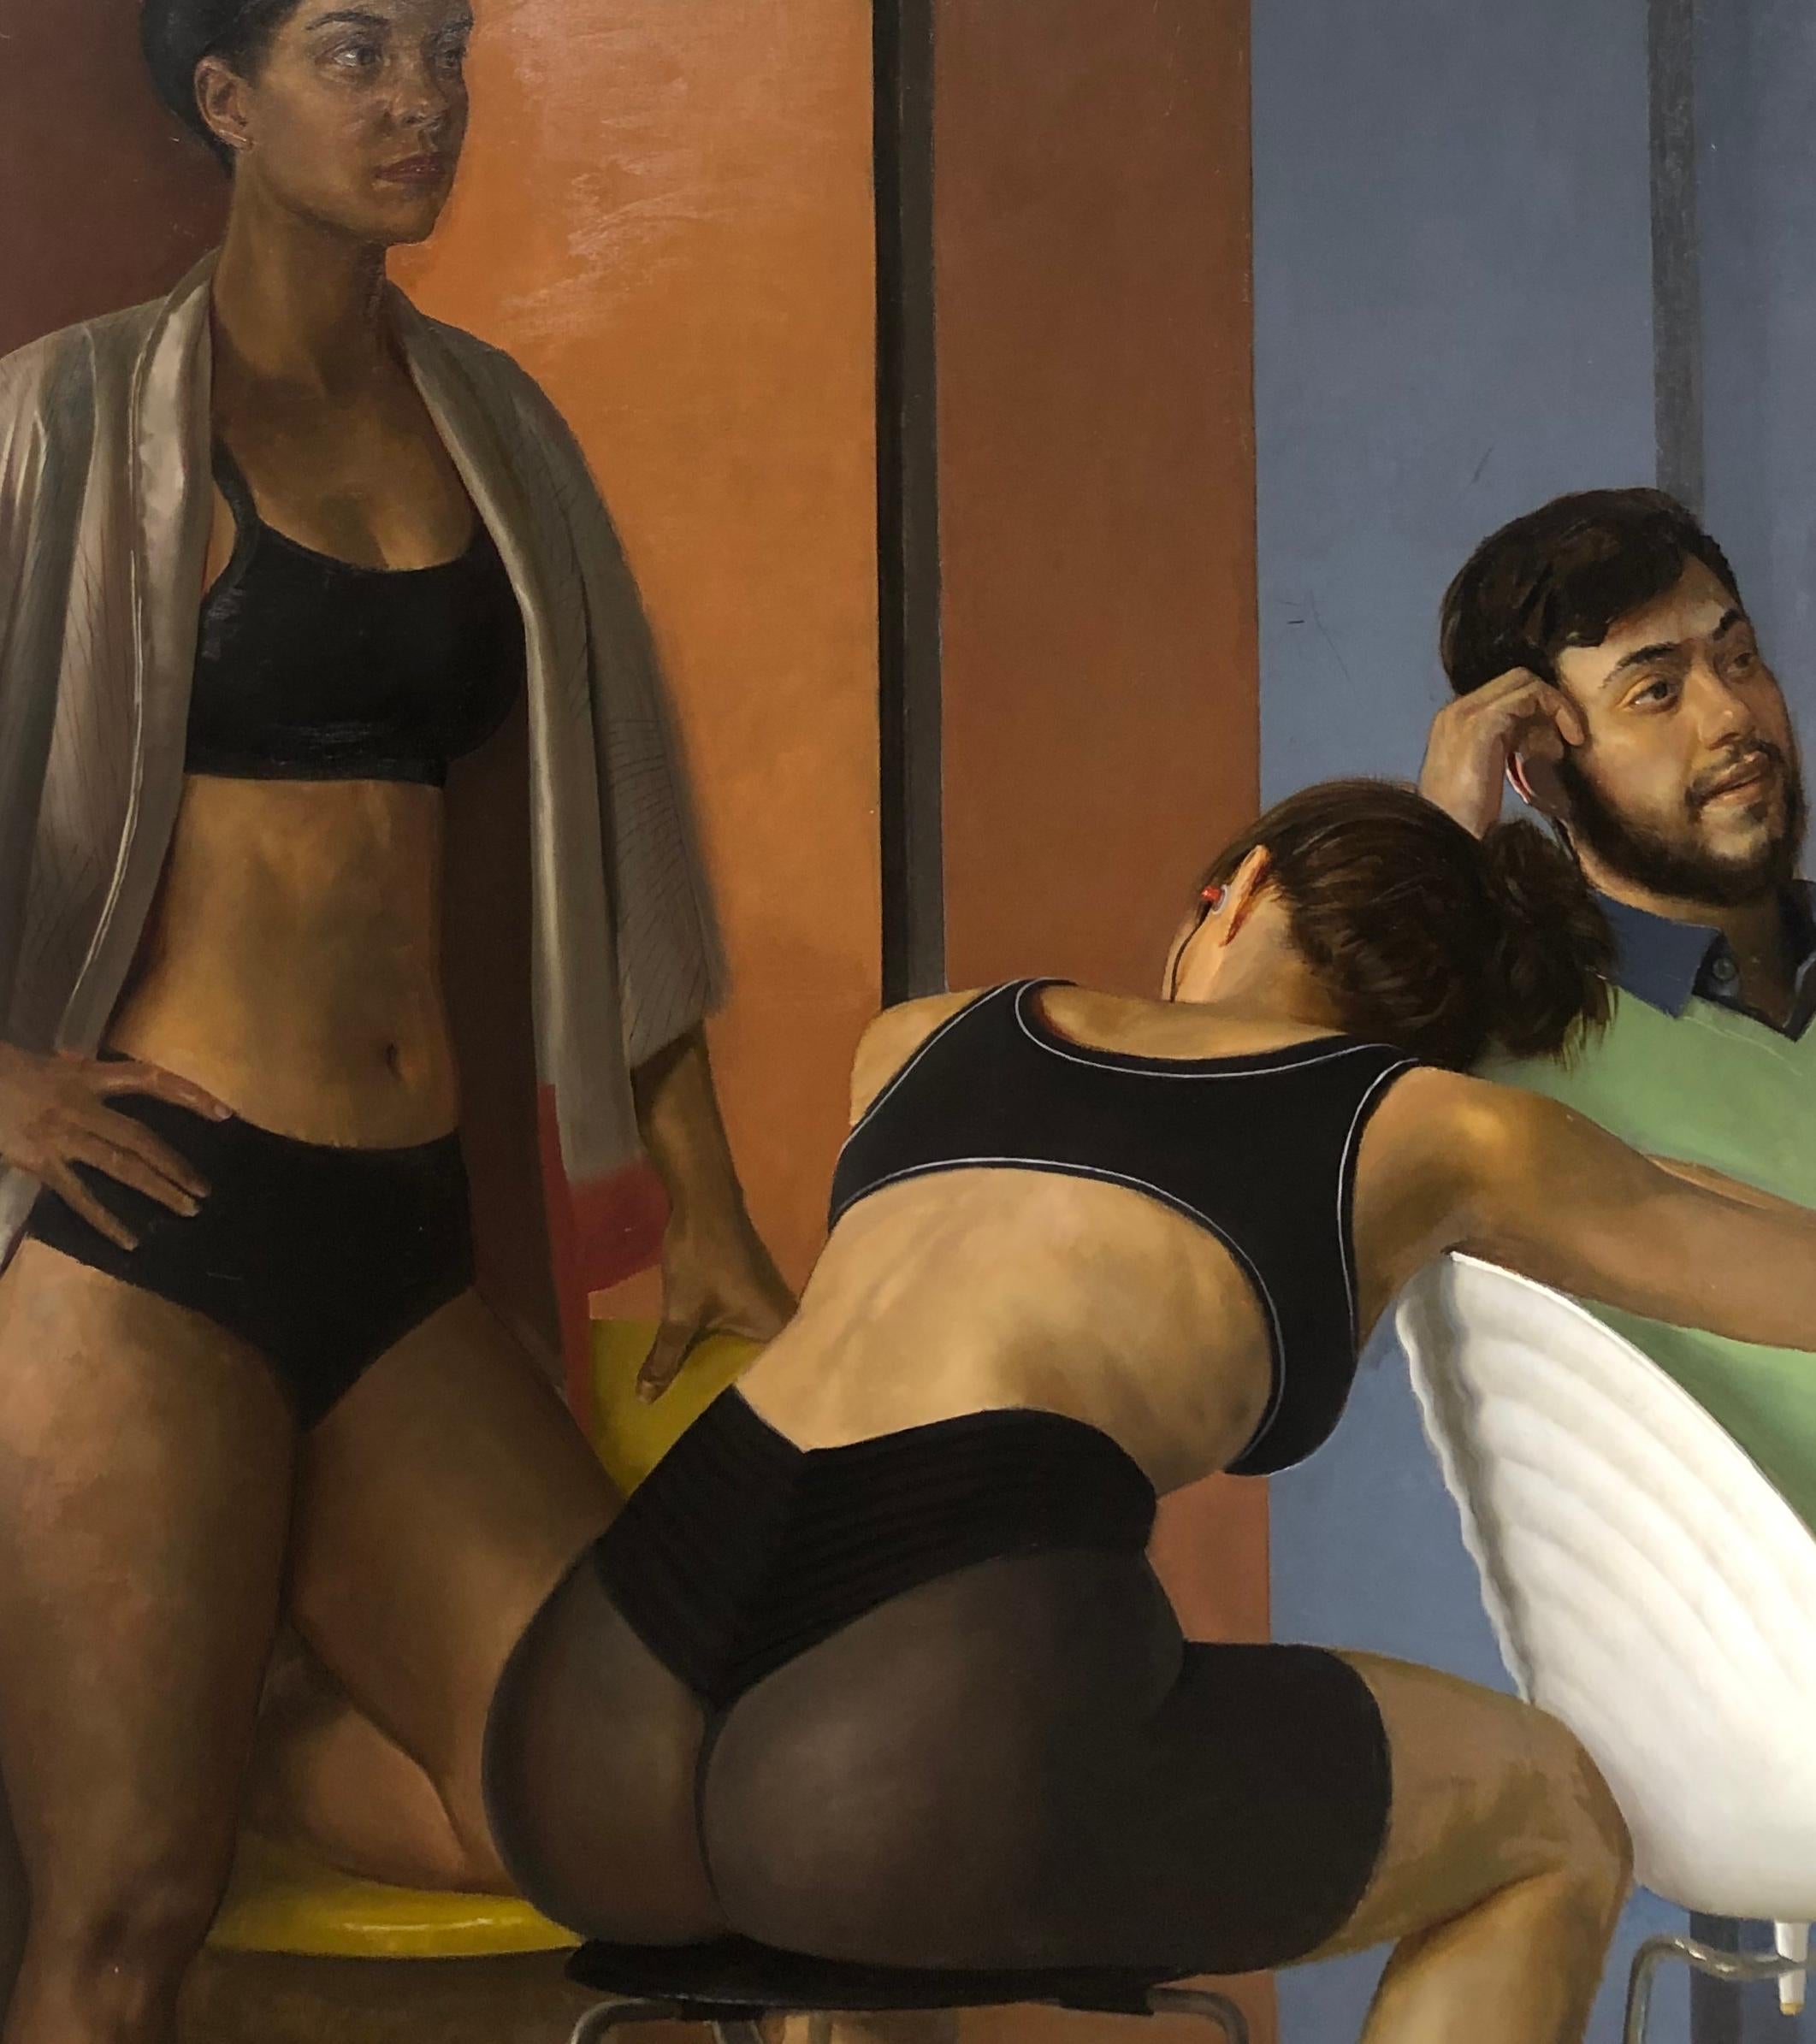 Motion Capture Studio 9, Scene Depicting Female Dancers, Male Computer Techs - Contemporary Painting by Andrew S. Conklin